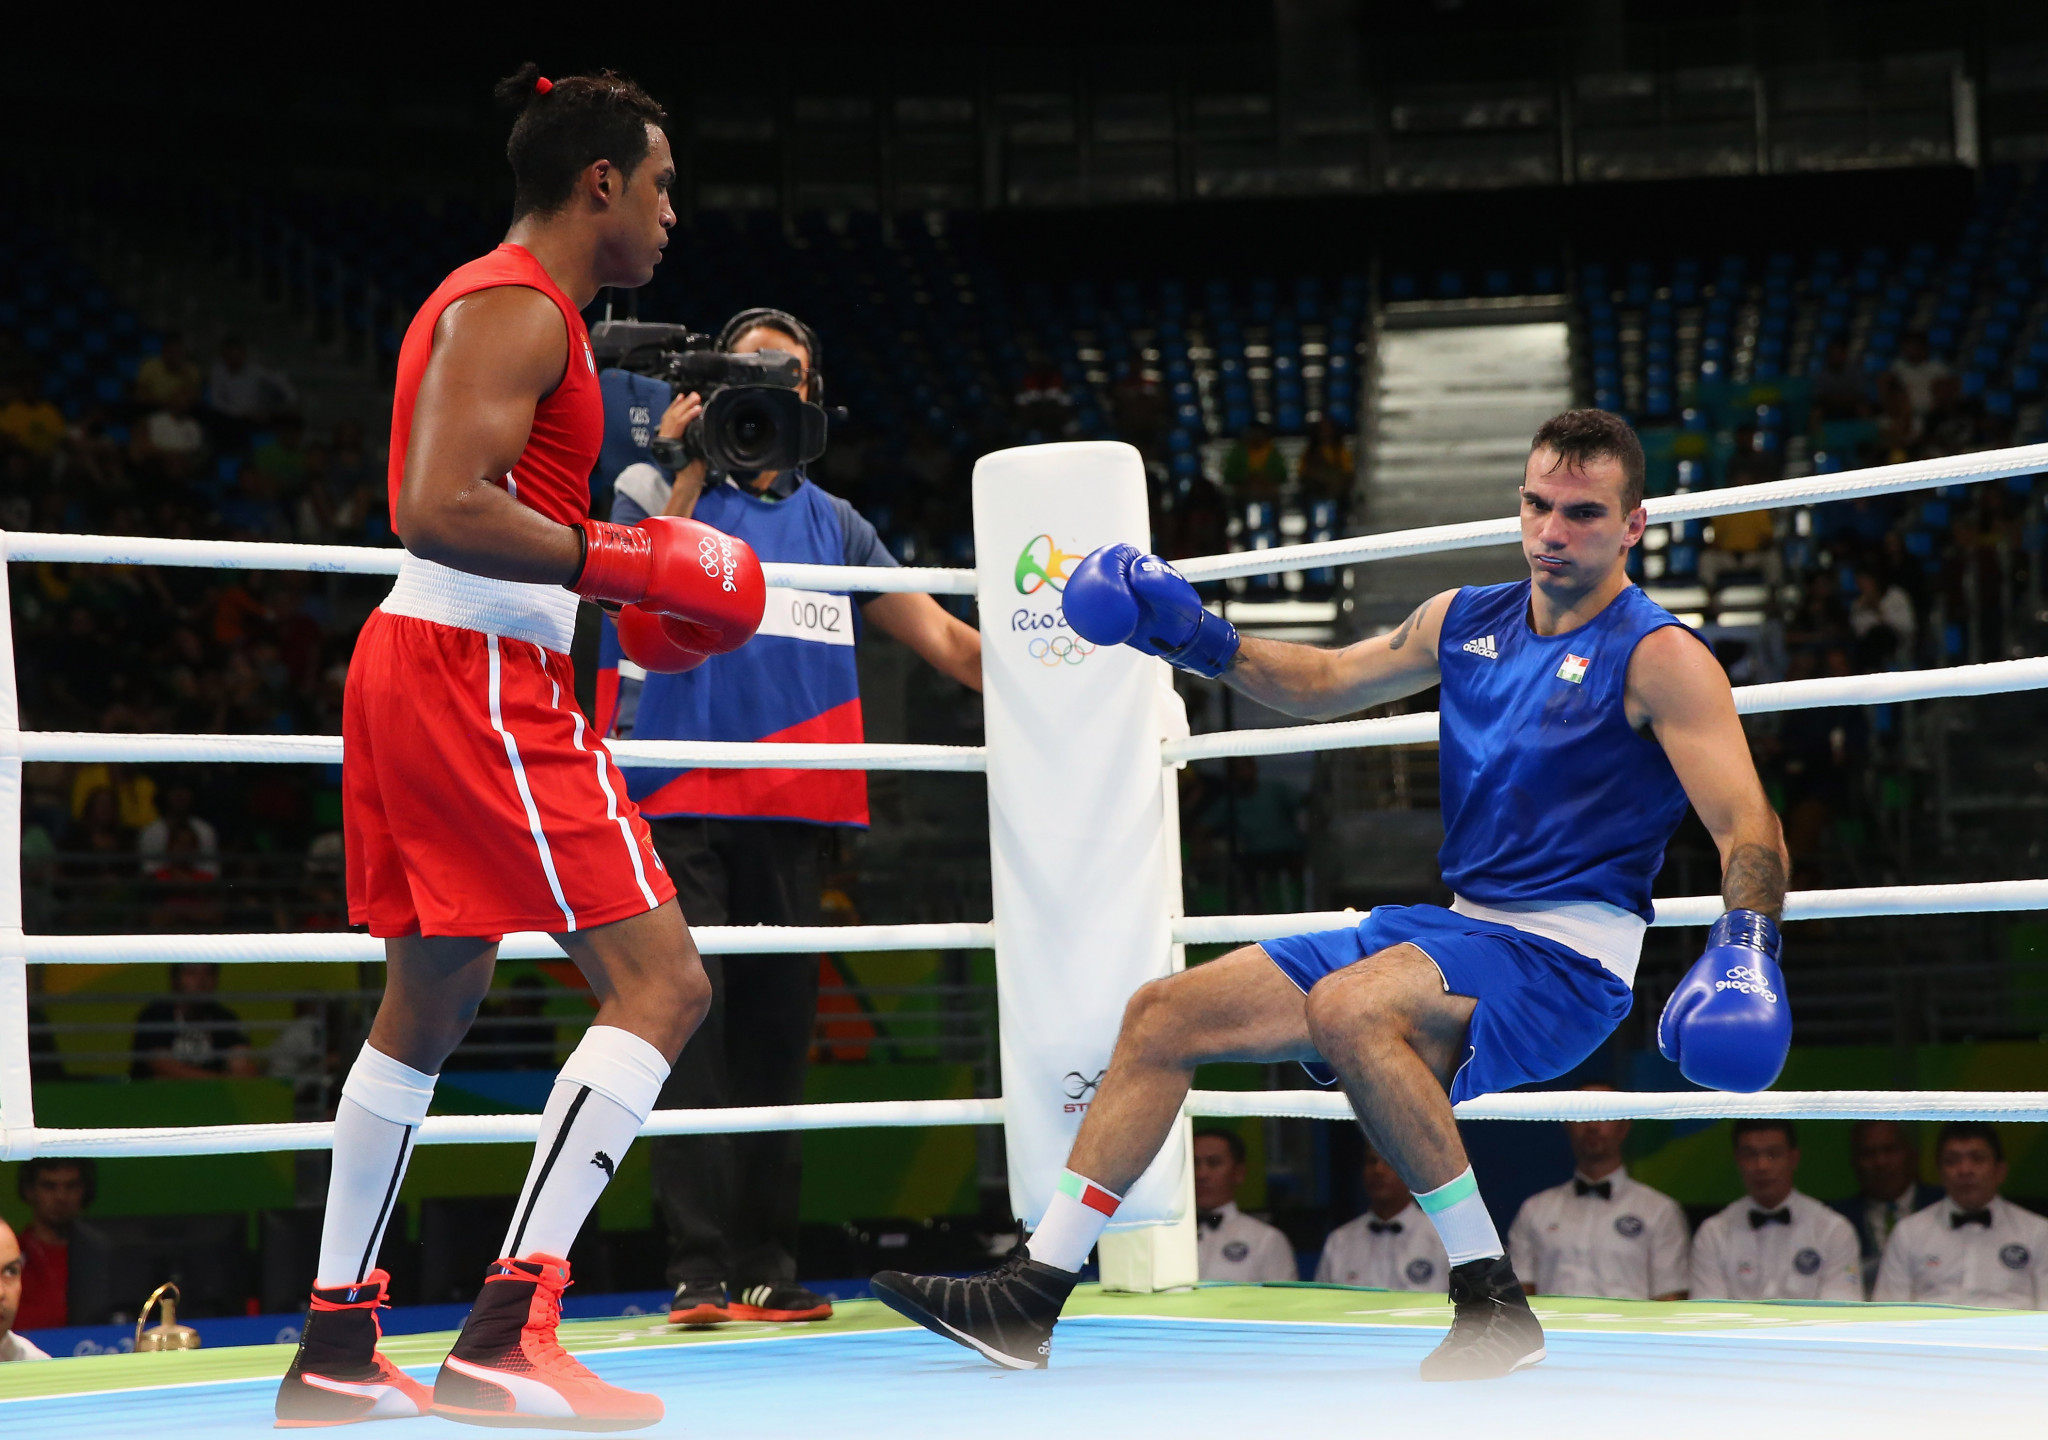 Boxing's Olympic future is likely to dominate discussions ©Getty Images